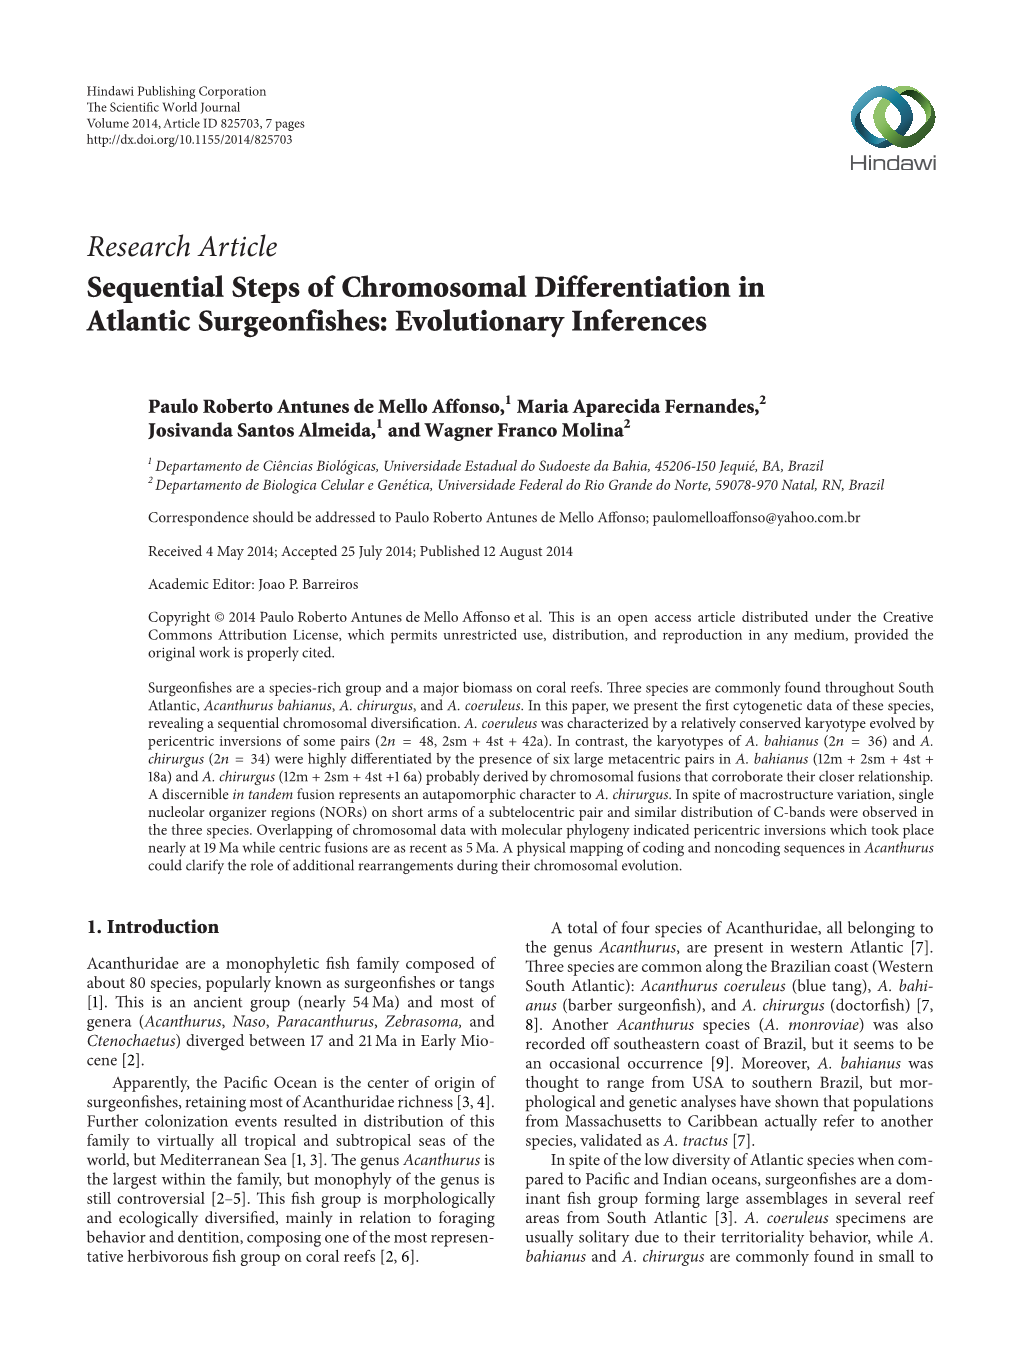 Research Article Sequential Steps of Chromosomal Differentiation in Atlantic Surgeonfishes: Evolutionary Inferences